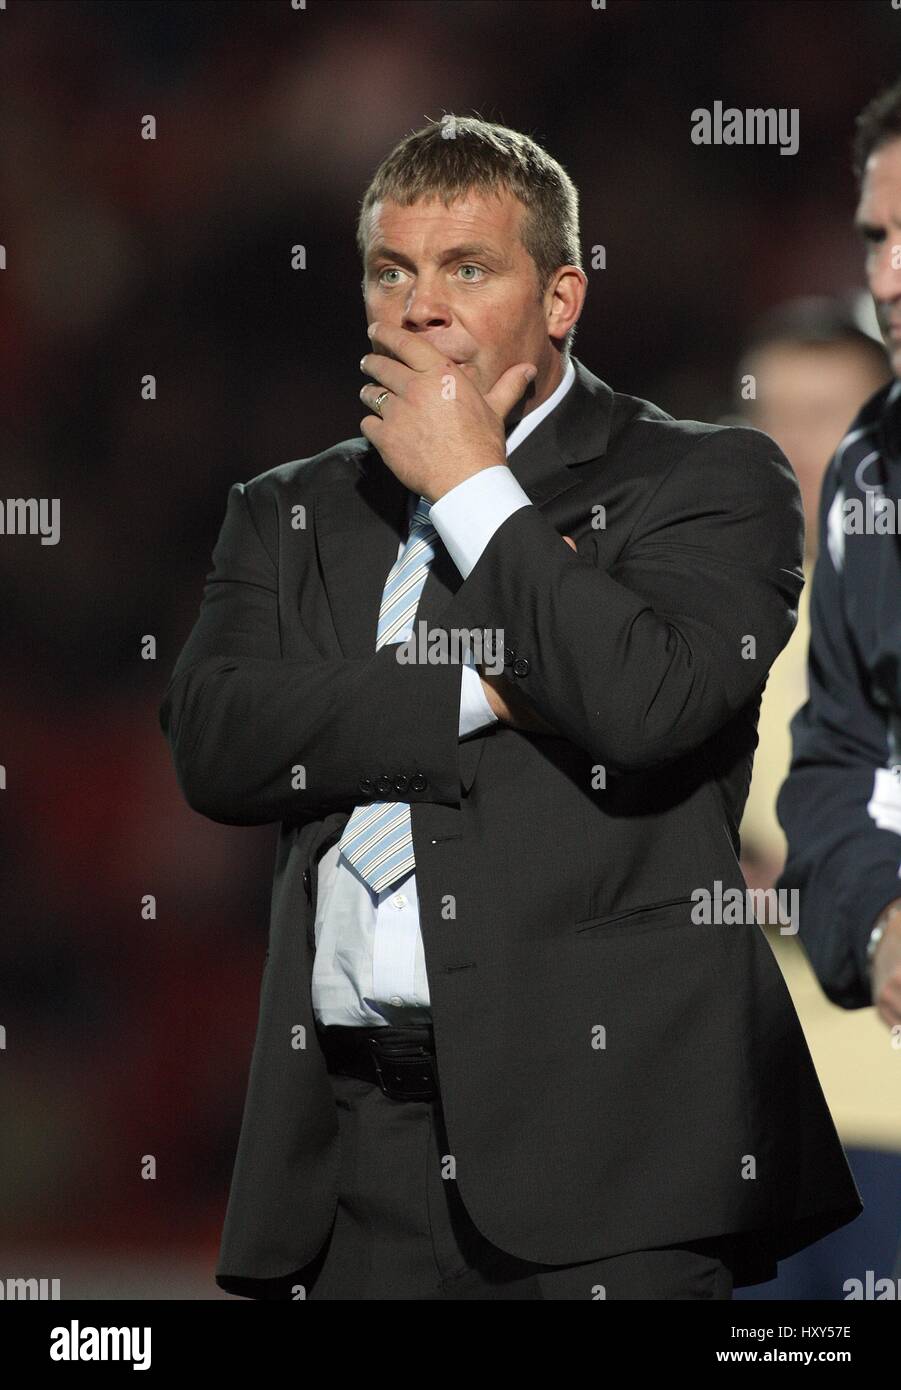 BOBBY GOULDING FRANCE RUGBY LEAGUE COACH KEEPMOAT STADIUM DONCASTER ENGLAND 23 October 2009 Stock Photo